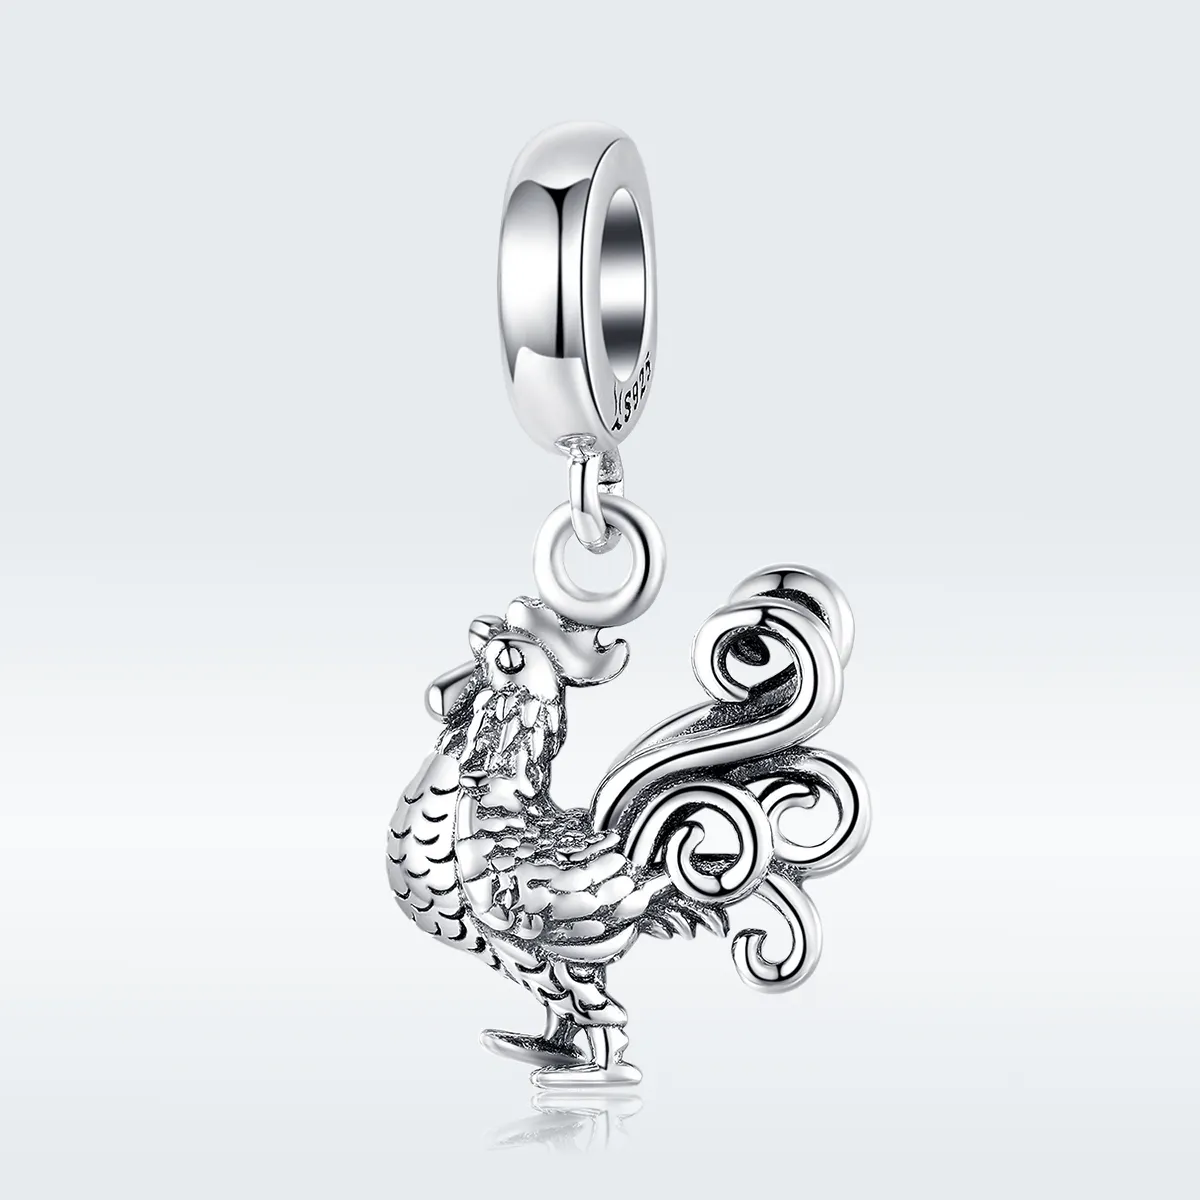 Silver 925 Jewelry Pendant Charm Orginal 925 Bracelet oder Necklace Deign Brave Rooster Charms DIY Jewelry